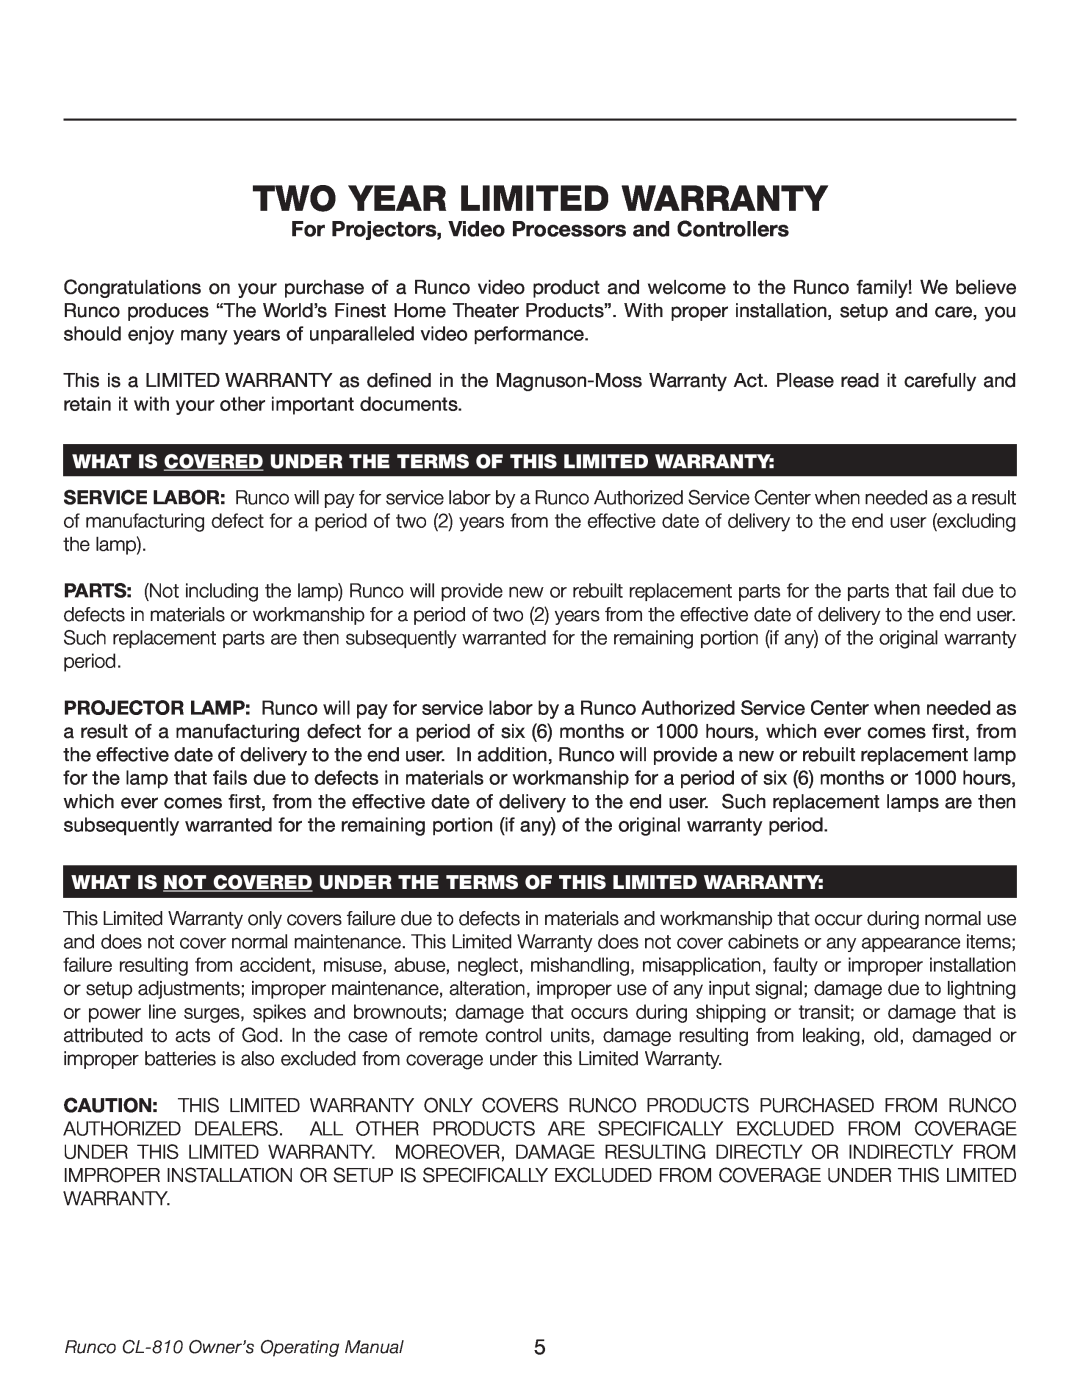 Runco CL-810 manual What Is Covered Under The Terms Of This Limited Warranty, Two Year Limited Warranty 